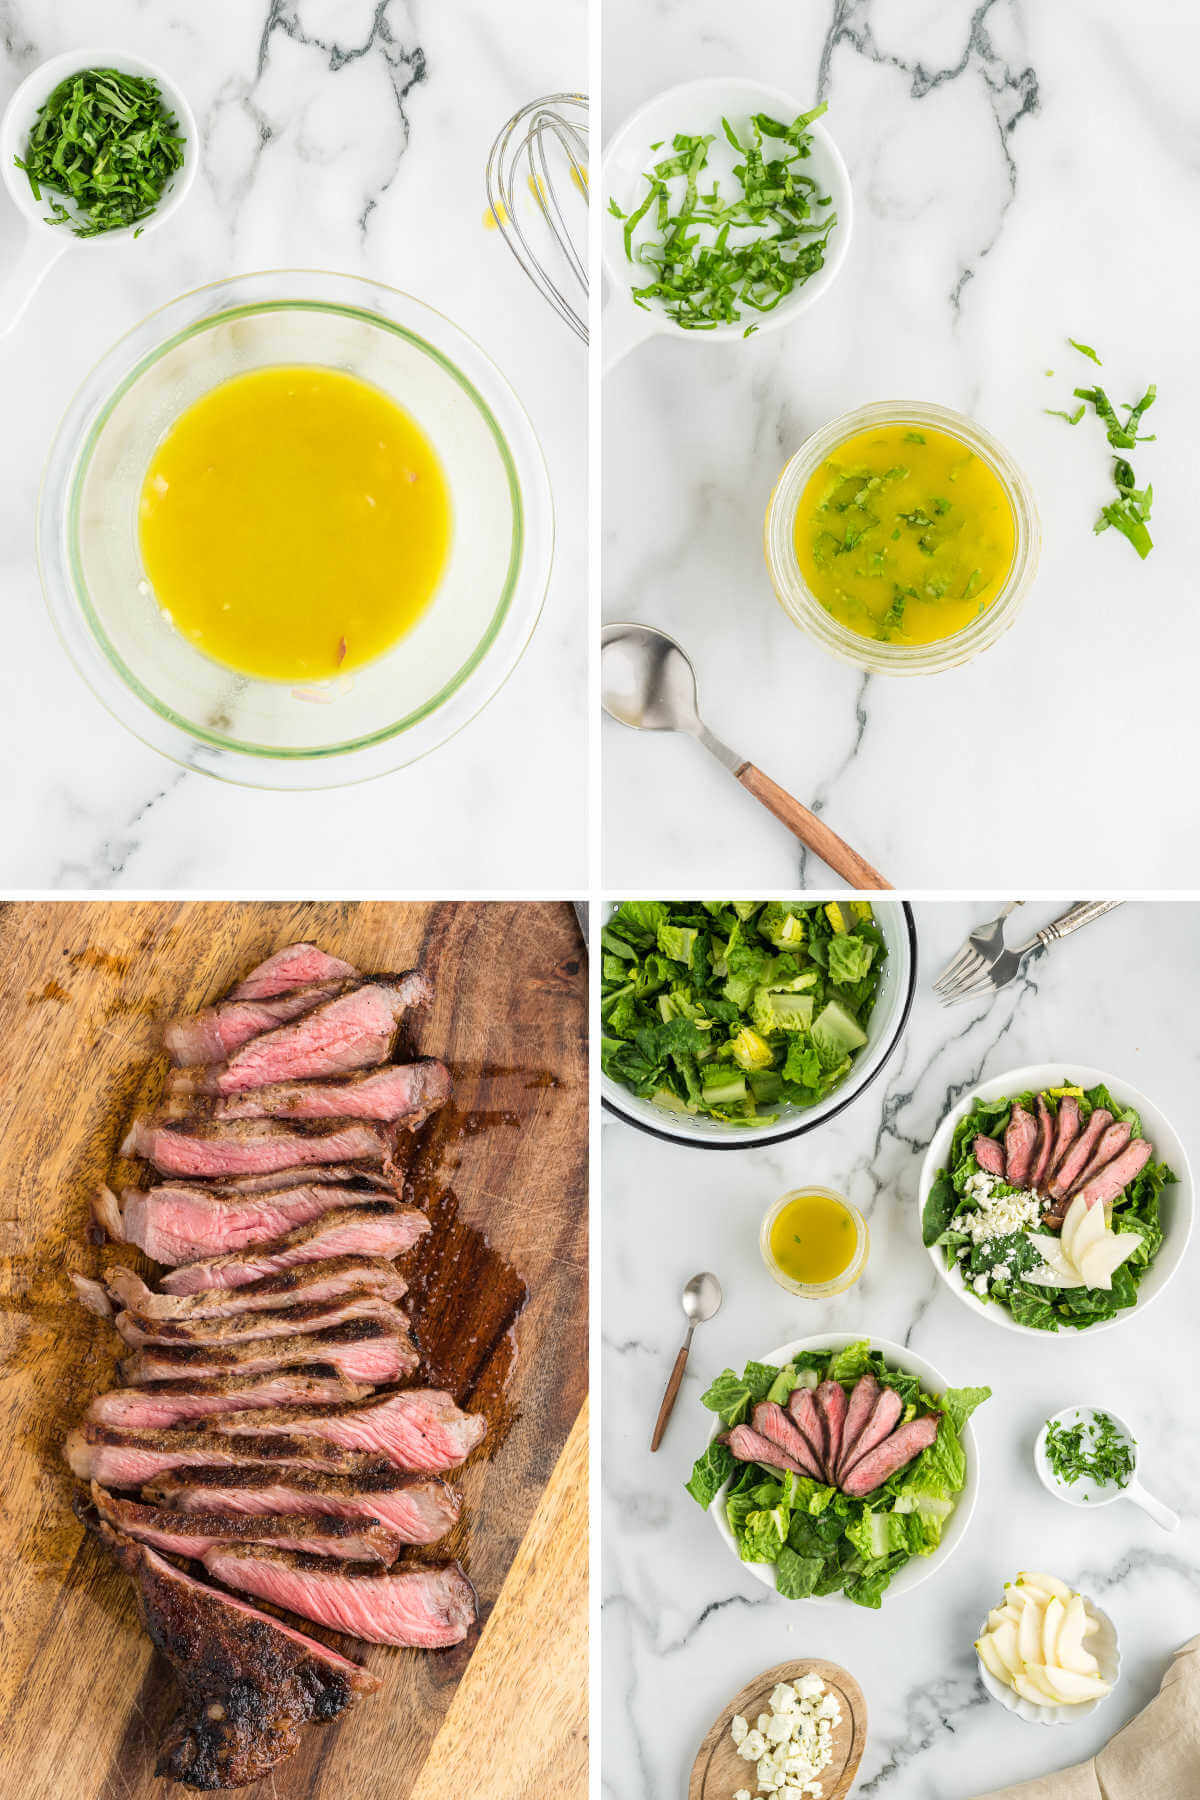 whisking together ingredients for French vinaigrette and assembling a grilled steak salad in a white bowl.